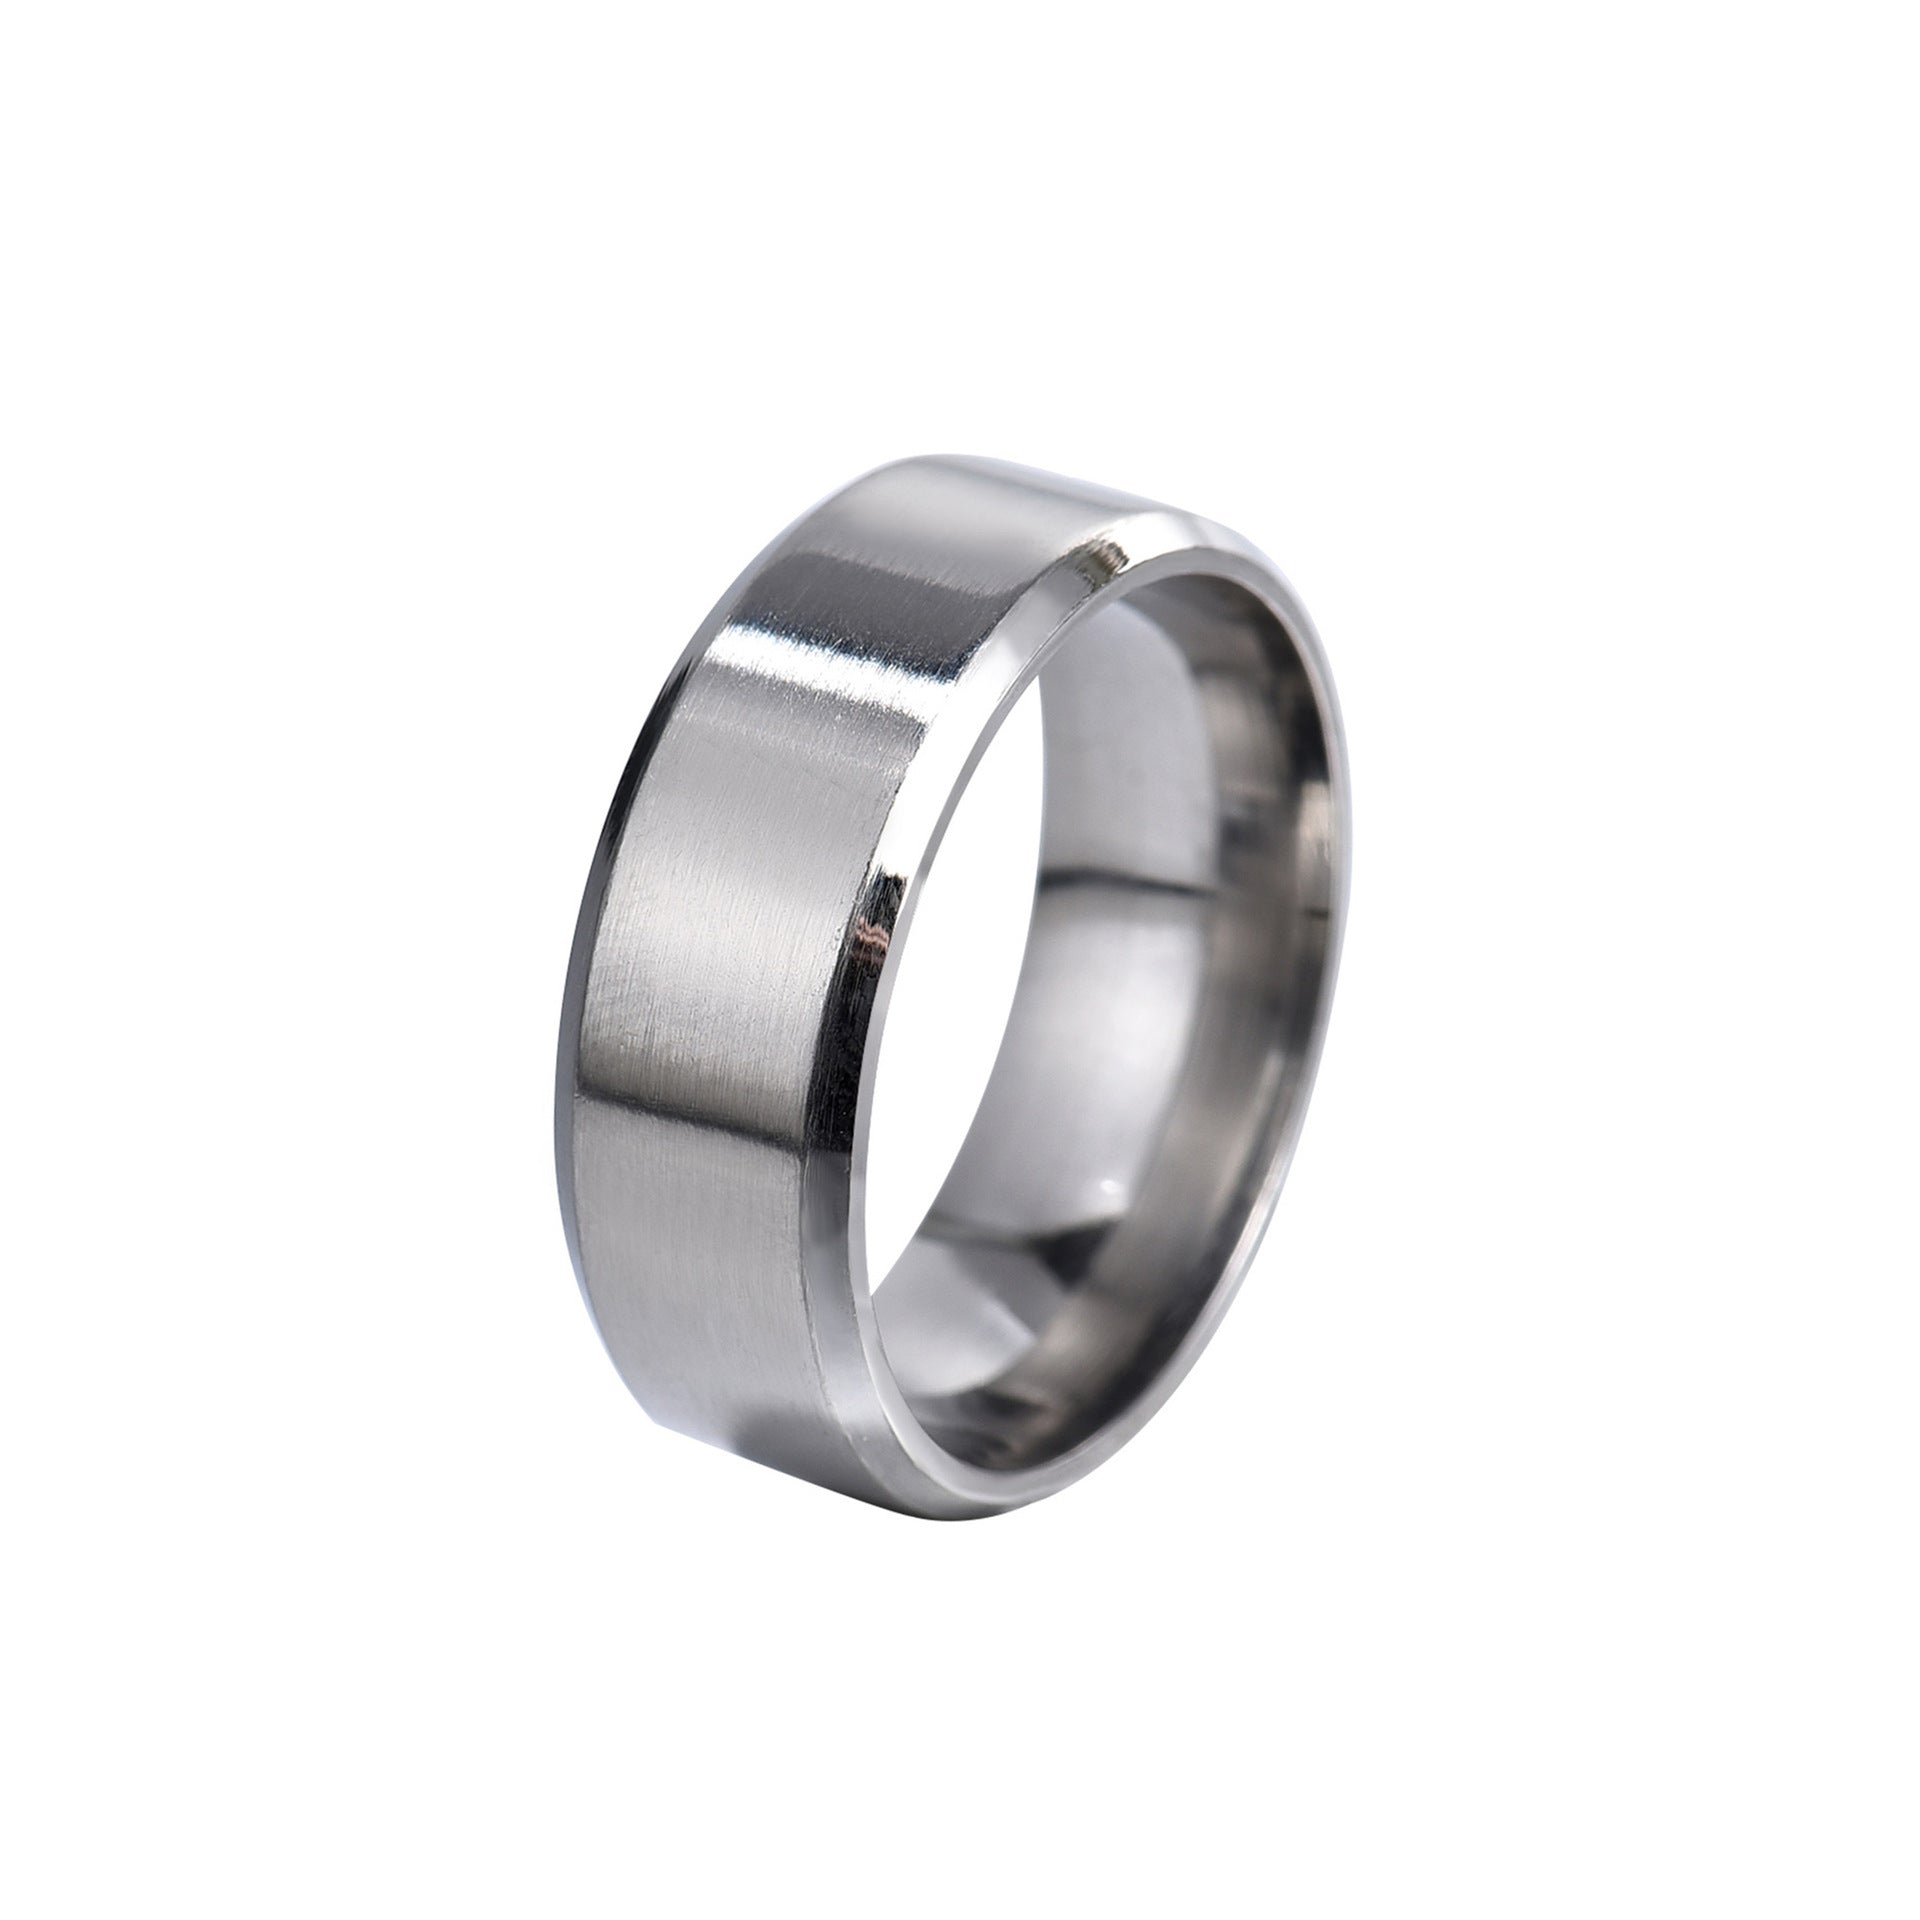 Silver Colored 316L Quality Steel Ring Wedding Ring (17 Size)